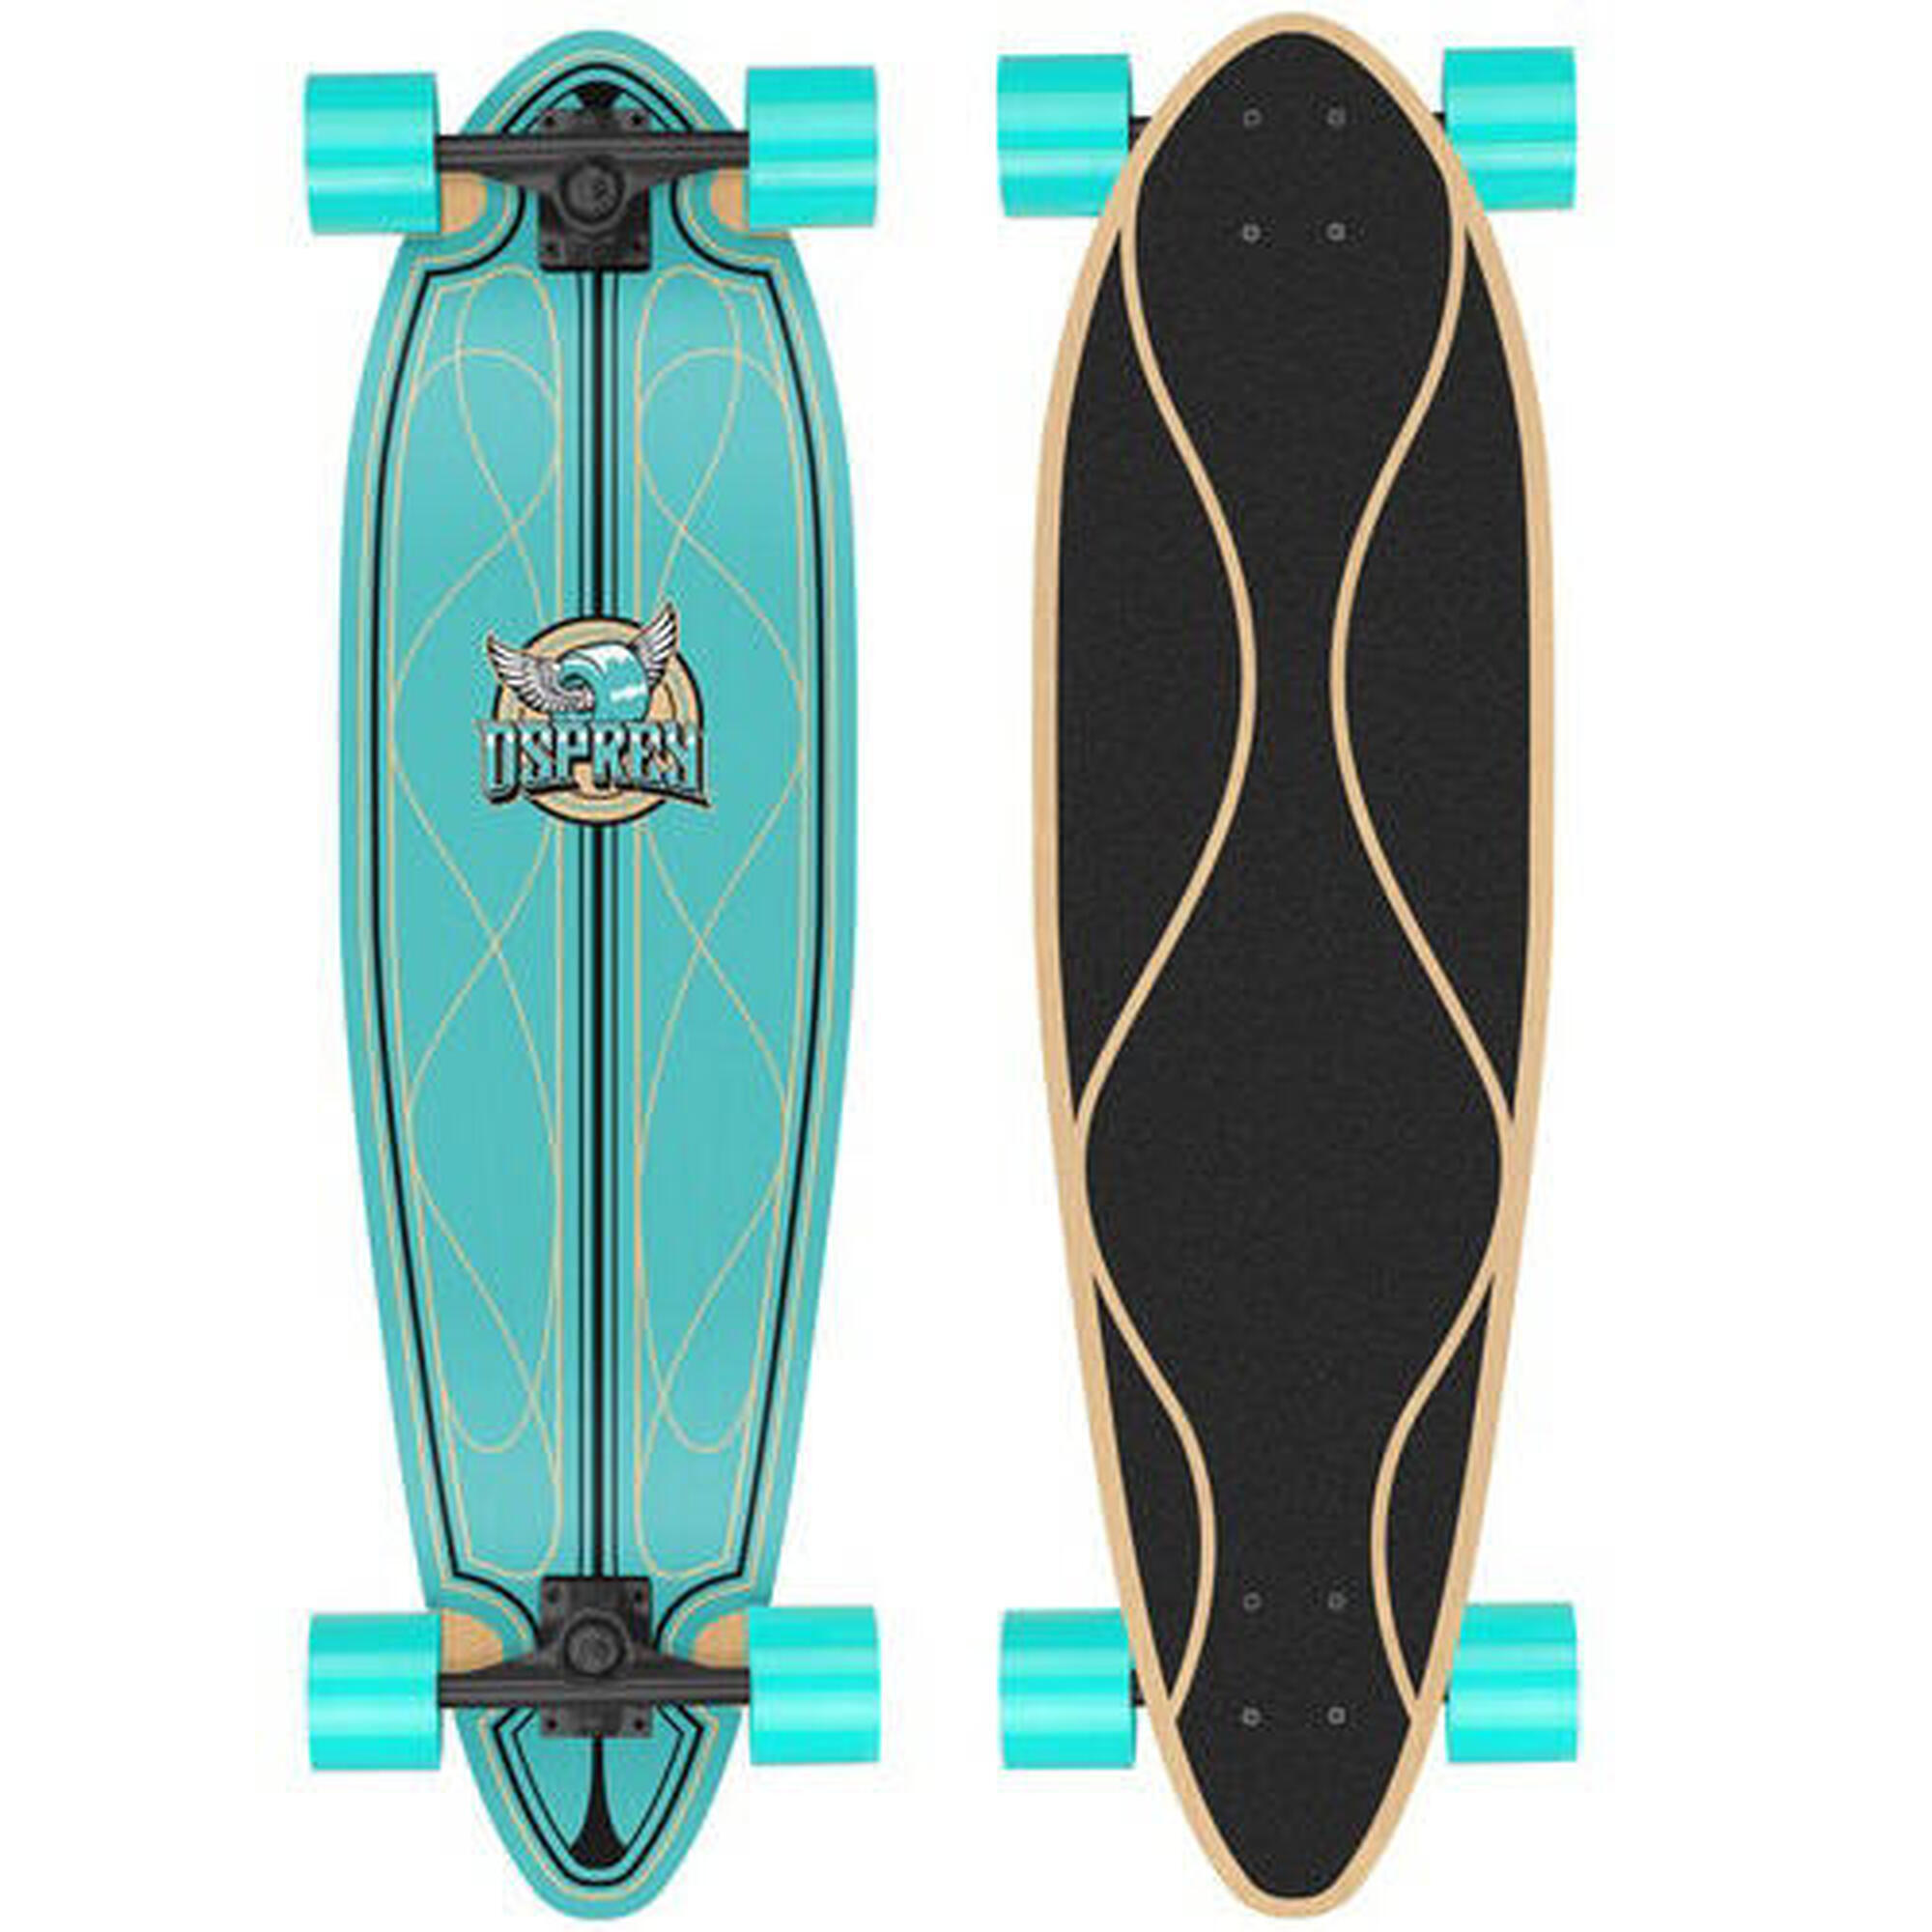 Osprey Complete Longboard, Twin Top Maple Concave Deck Helix 1/4